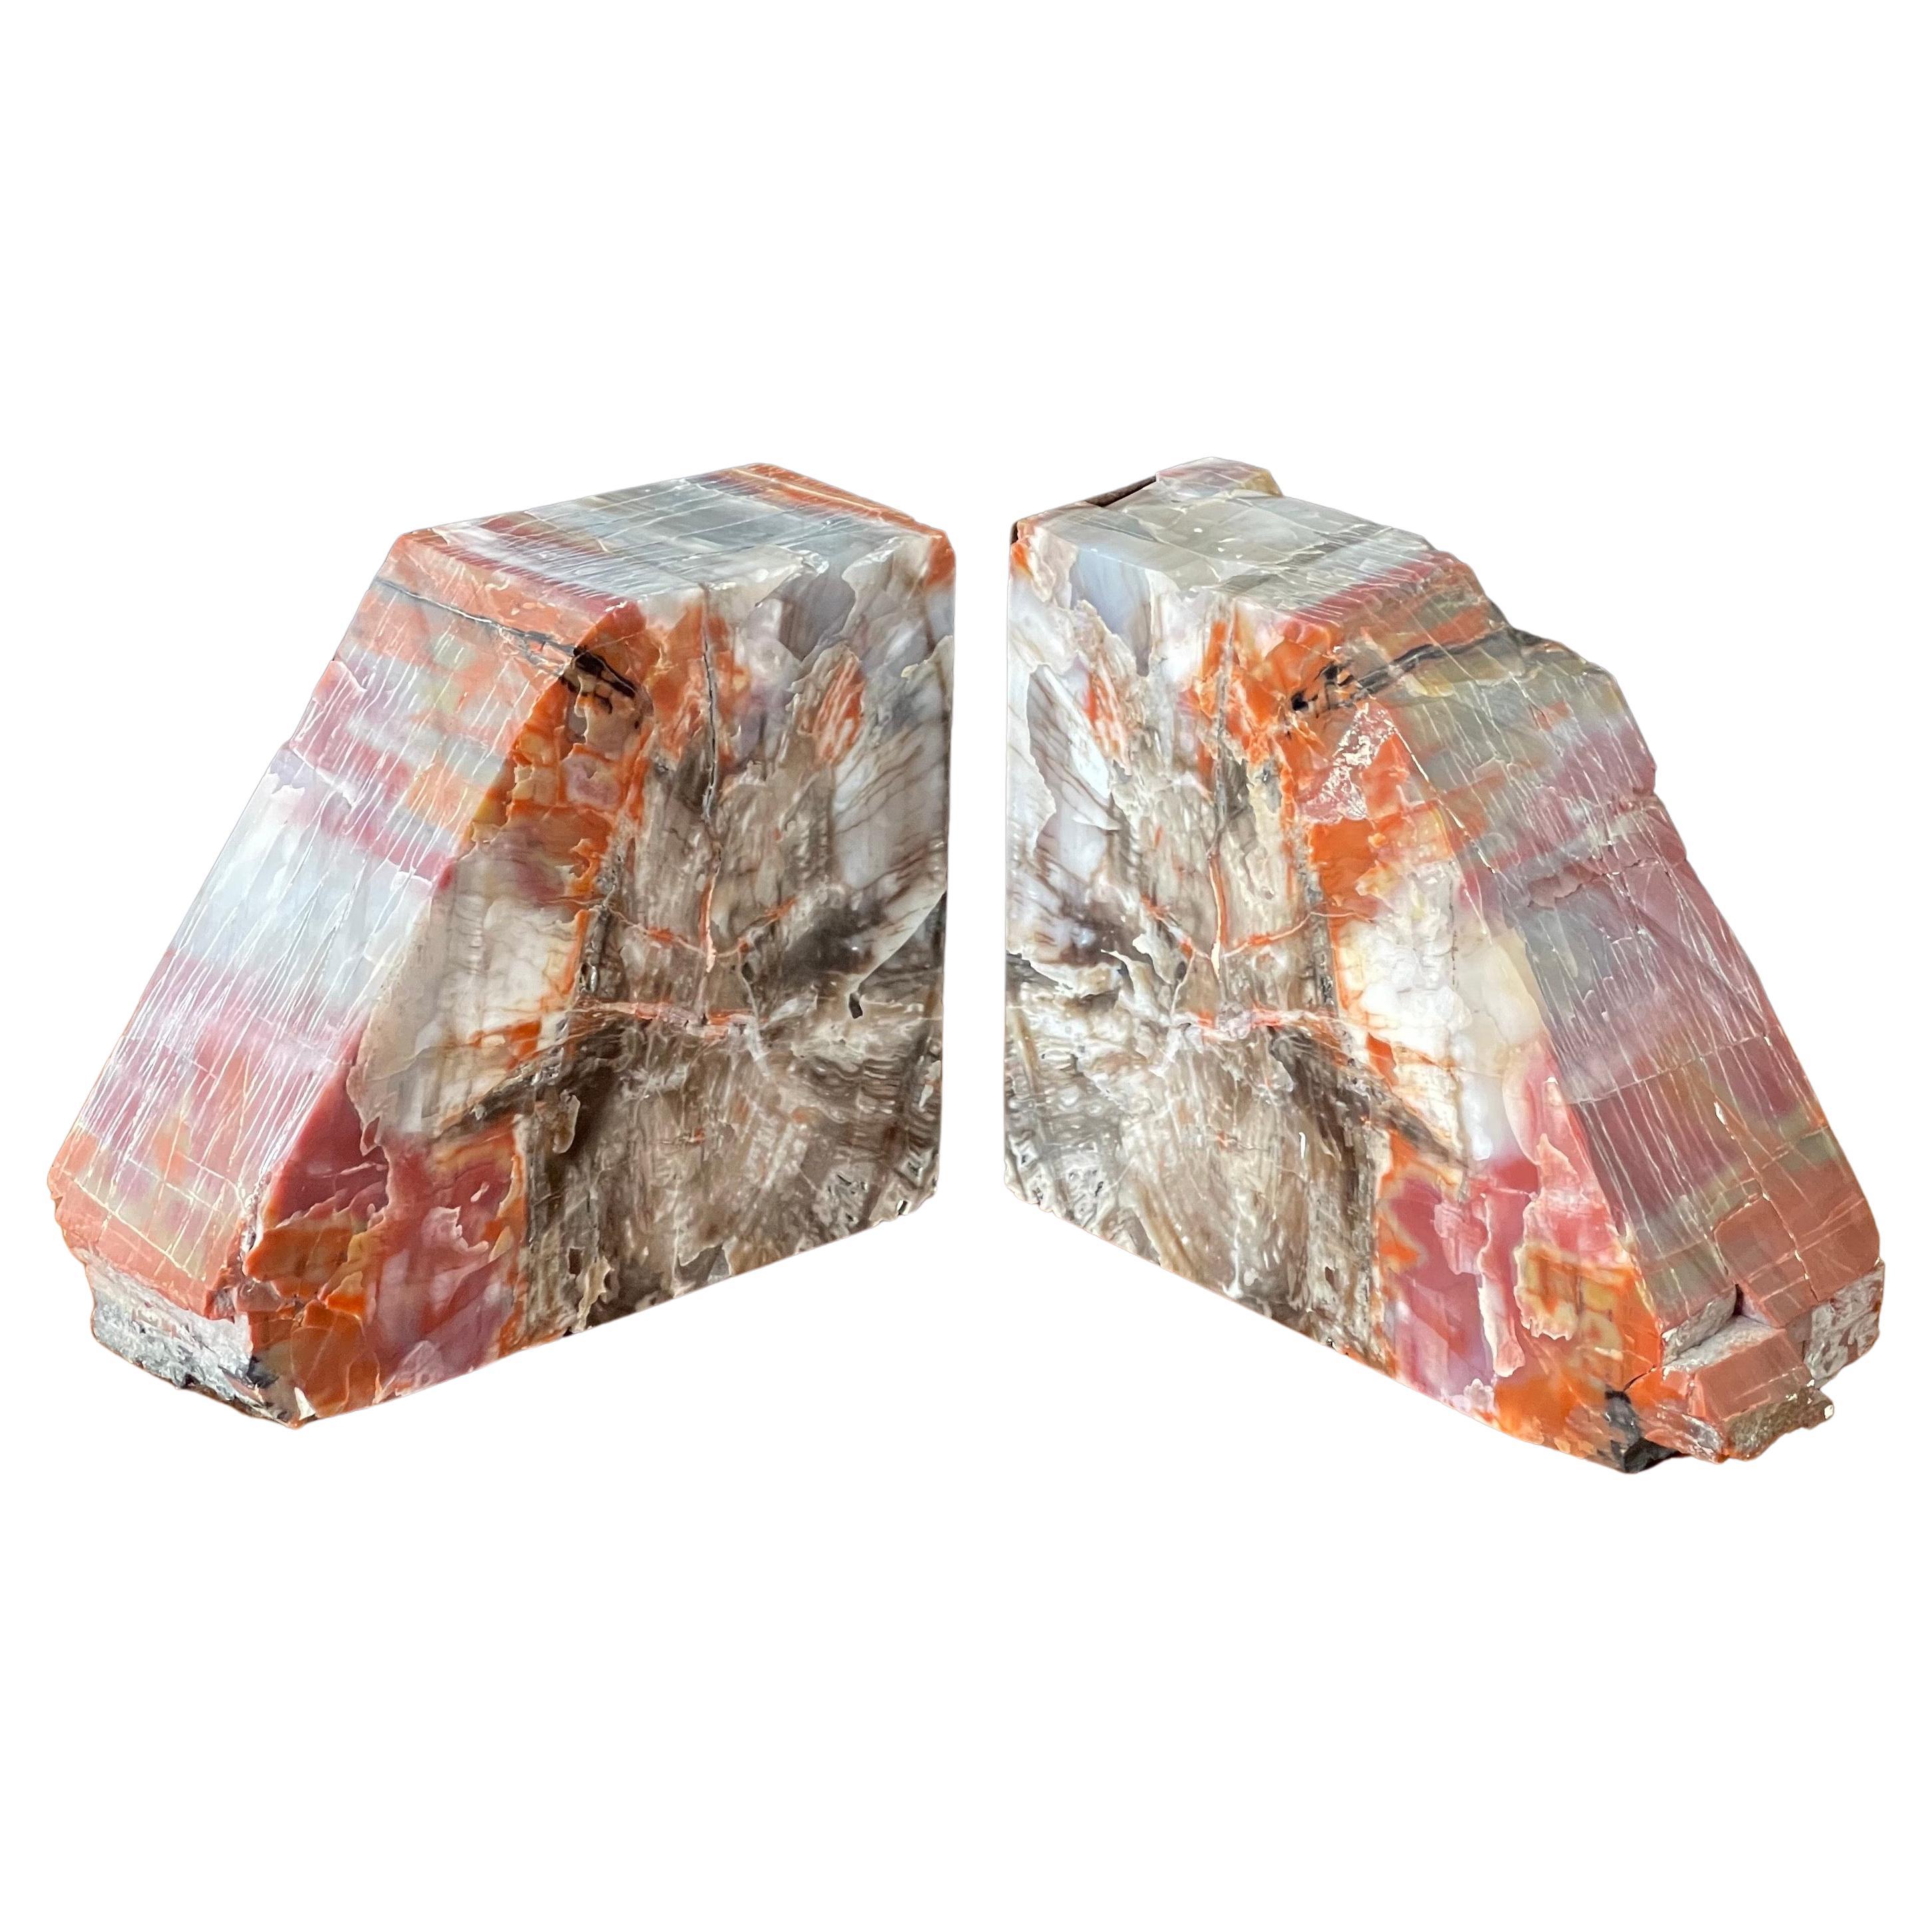 Impressive Pair of Large Petrified Wood Bookends